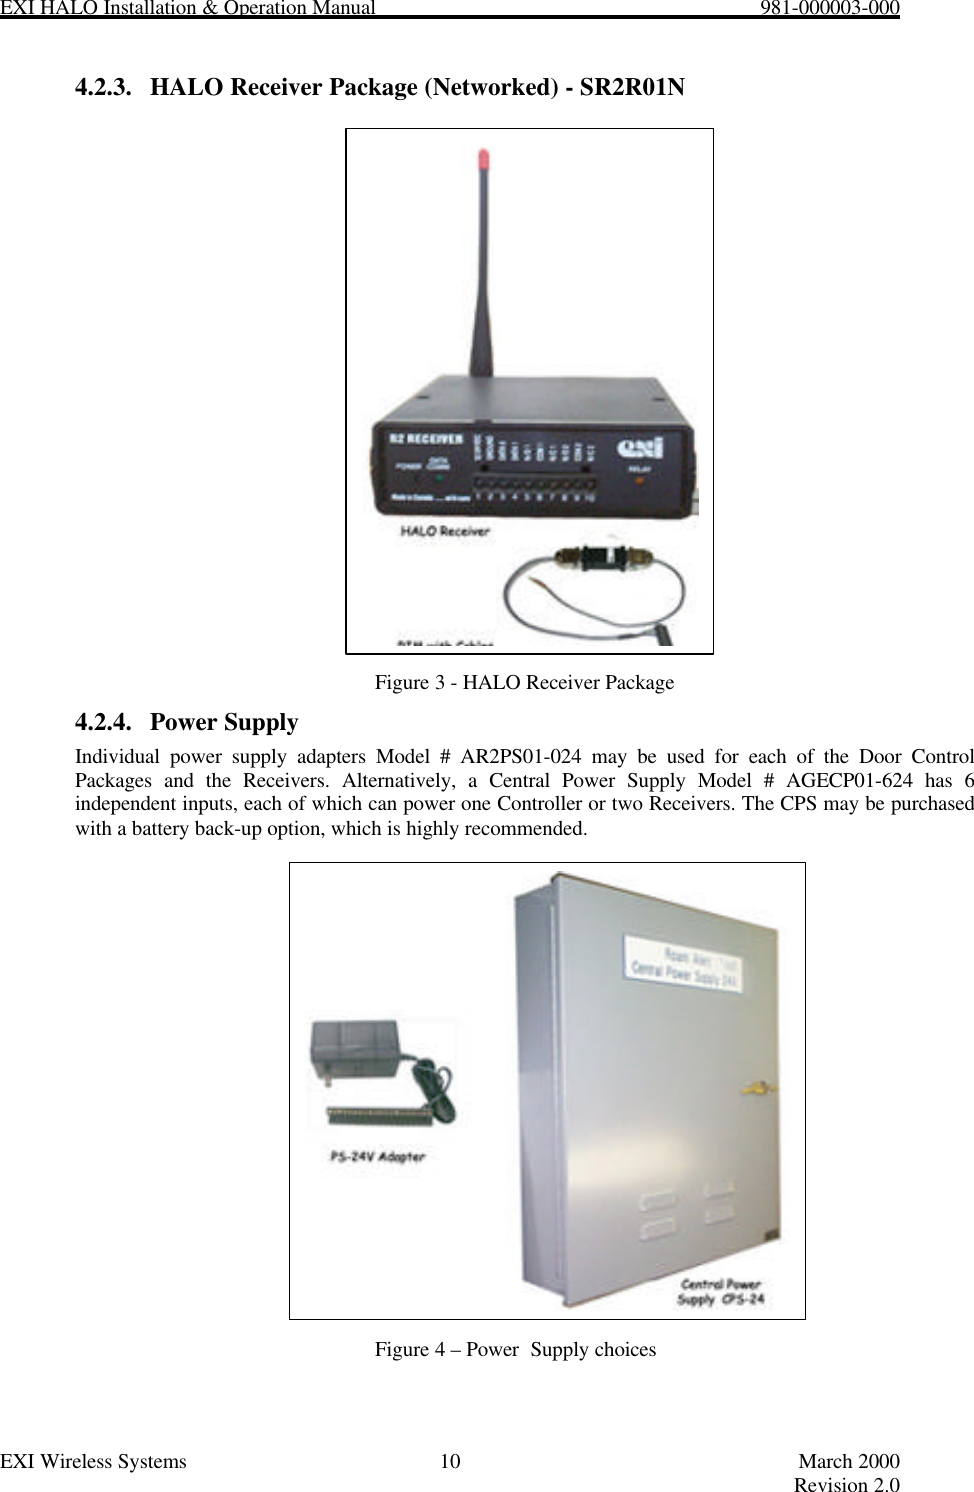 EXI HALO Installation &amp; Operation Manual                                                            981-000003-000EXI Wireless Systems 10 March 2000Revision 2.04.2.3. HALO Receiver Package (Networked) - SR2R01NFigure 3 - HALO Receiver Package4.2.4. Power SupplyIndividual power supply adapters Model # AR2PS01-024 may be used for each of the Door ControlPackages and the Receivers. Alternatively, a Central Power Supply Model # AGECP01-624 has 6independent inputs, each of which can power one Controller or two Receivers. The CPS may be purchasedwith a battery back-up option, which is highly recommended.Figure 4 – Power  Supply choices